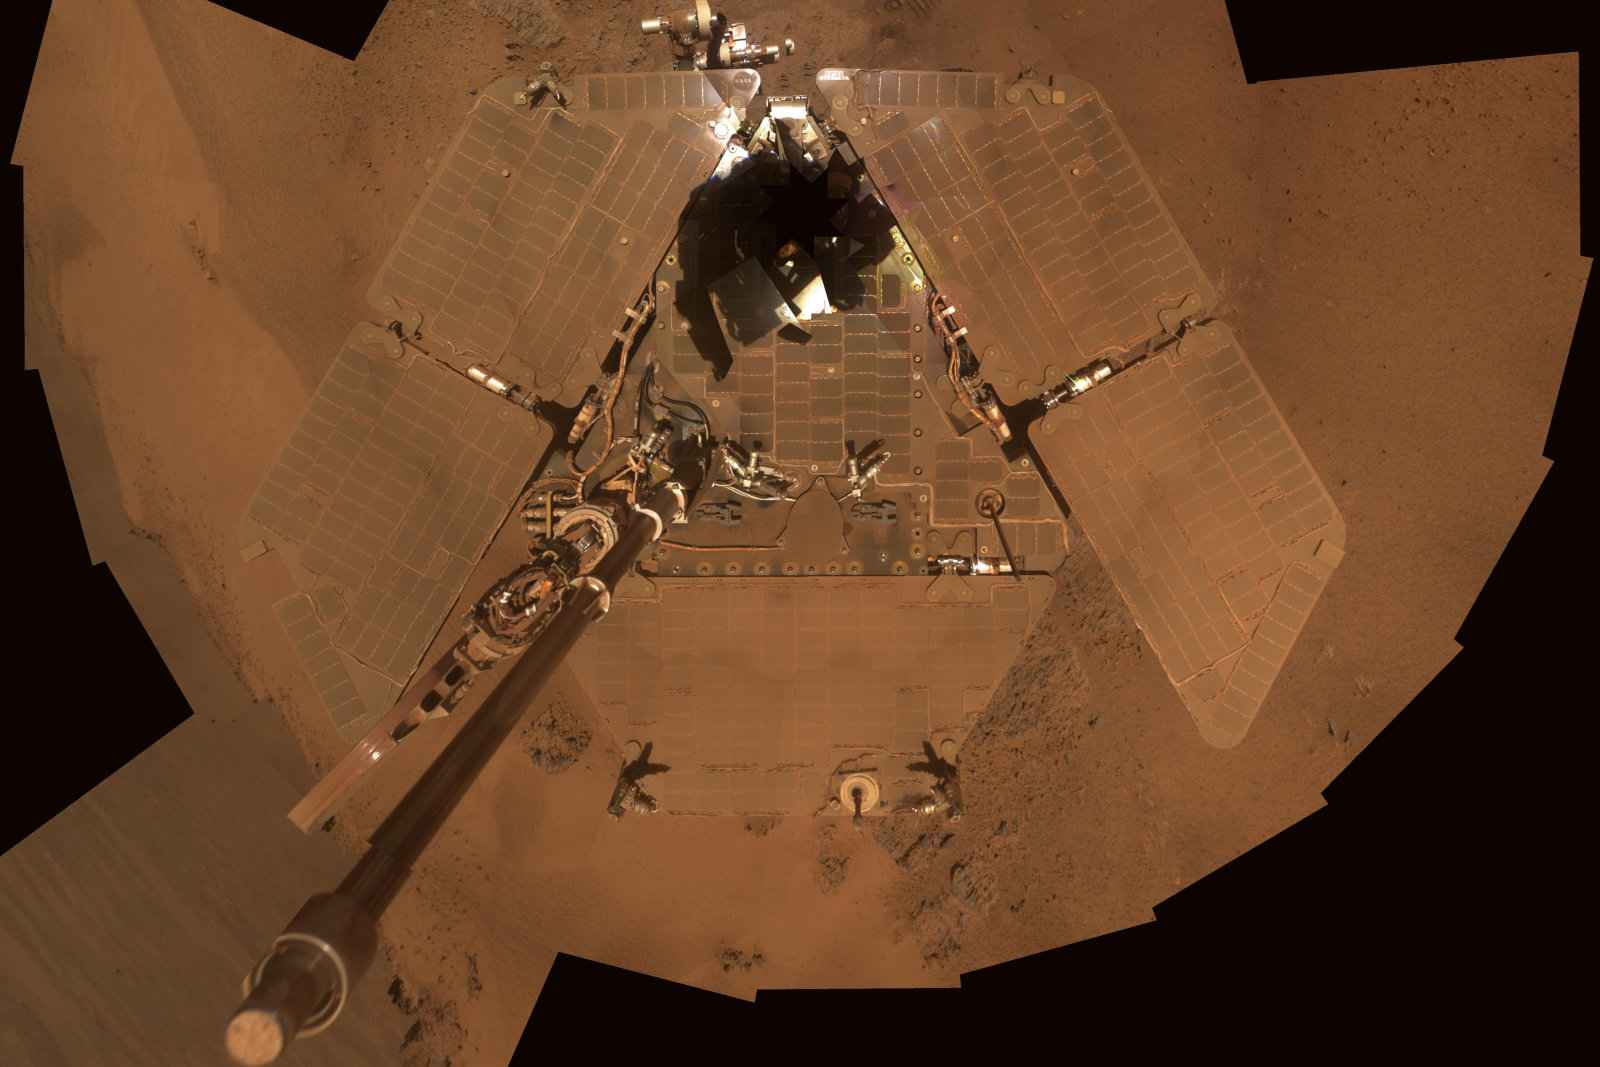 NASA handout image shows a self portrait from the Mars Exploration Rover Opportunity covered in dust as the mission approached its fifth Martian winter, December 21 to 24, 2011. This is a mosaic of images taken by Opportunity's panoramic camera (Pancam) during the 2,111th to 2,814th Martian days, or sols. The downward-looking view omits the mast on which the camera is mounted. REUTERS/NASA/JPL-Caltech/Cornell/Arizona State University/Handout (SCIENCE TECHNOLOGY ENVIRONMENT) FOR EDITORIAL USE ONLY. NOT FOR SALE FOR MARKETING OR ADVERTISING CAMPAIGNS. THIS IMAGE HAS BEEN SUPPLIED BY A THIRD PARTY. IT IS DISTRIBUTED, EXACTLY AS RECEIVED BY REUTERS, AS A SERVICE TO CLIENTS